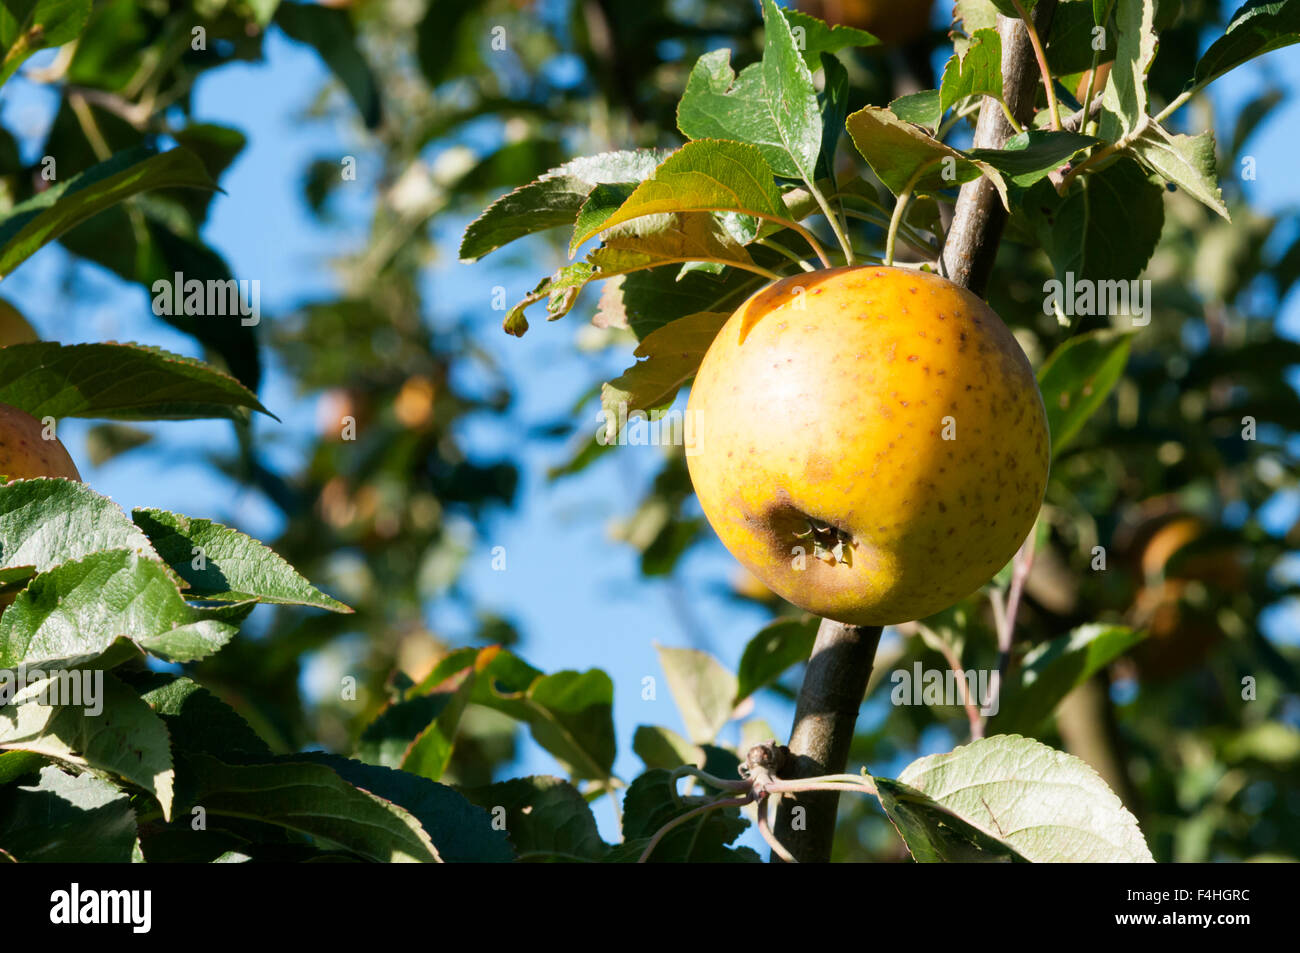 An apple of the variety Egremont Russet growing on a tree. Stock Photo